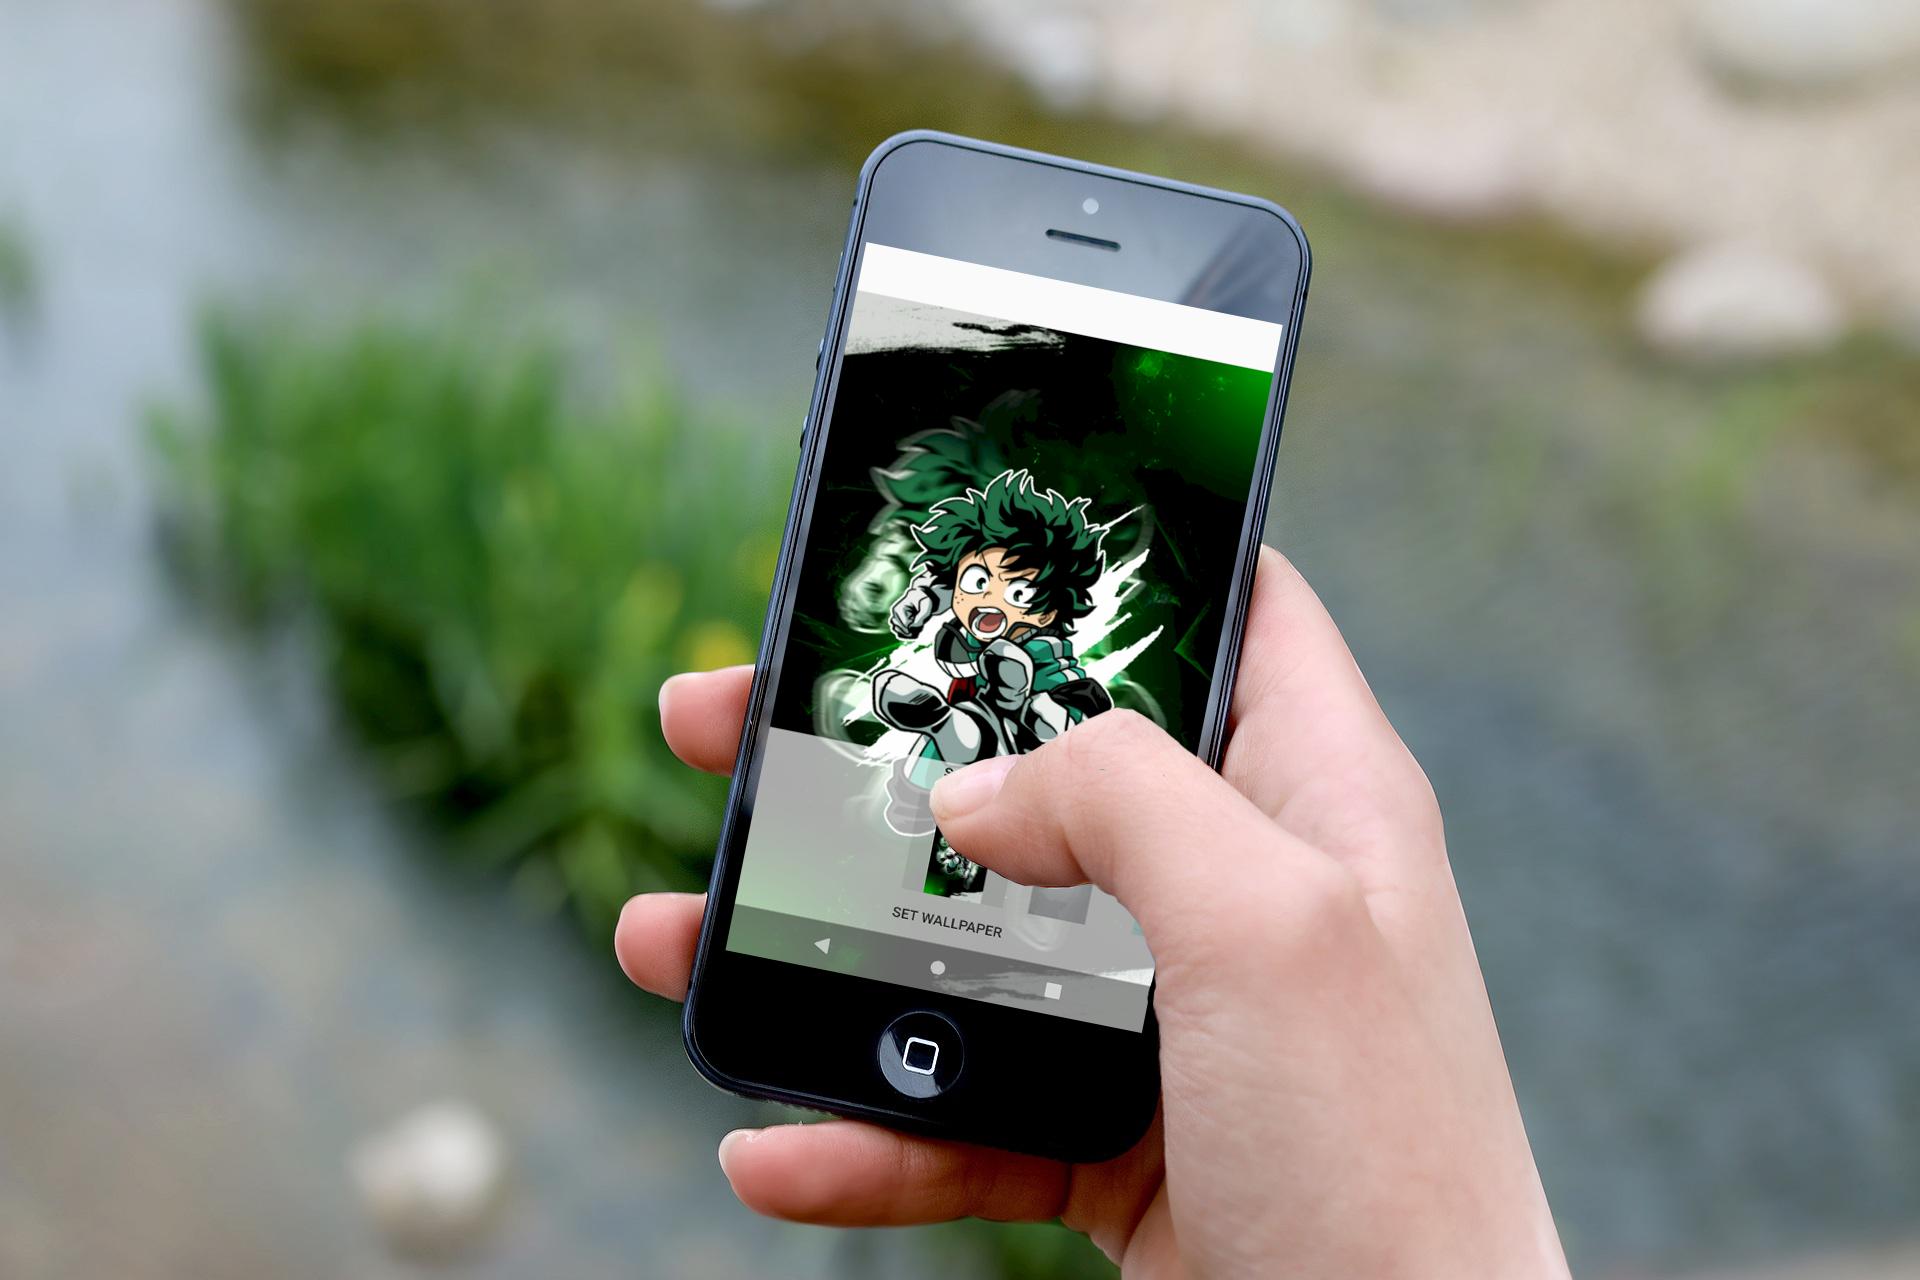  Boku  No  Hero  Academia  Wallpapers  for Android  APK Download